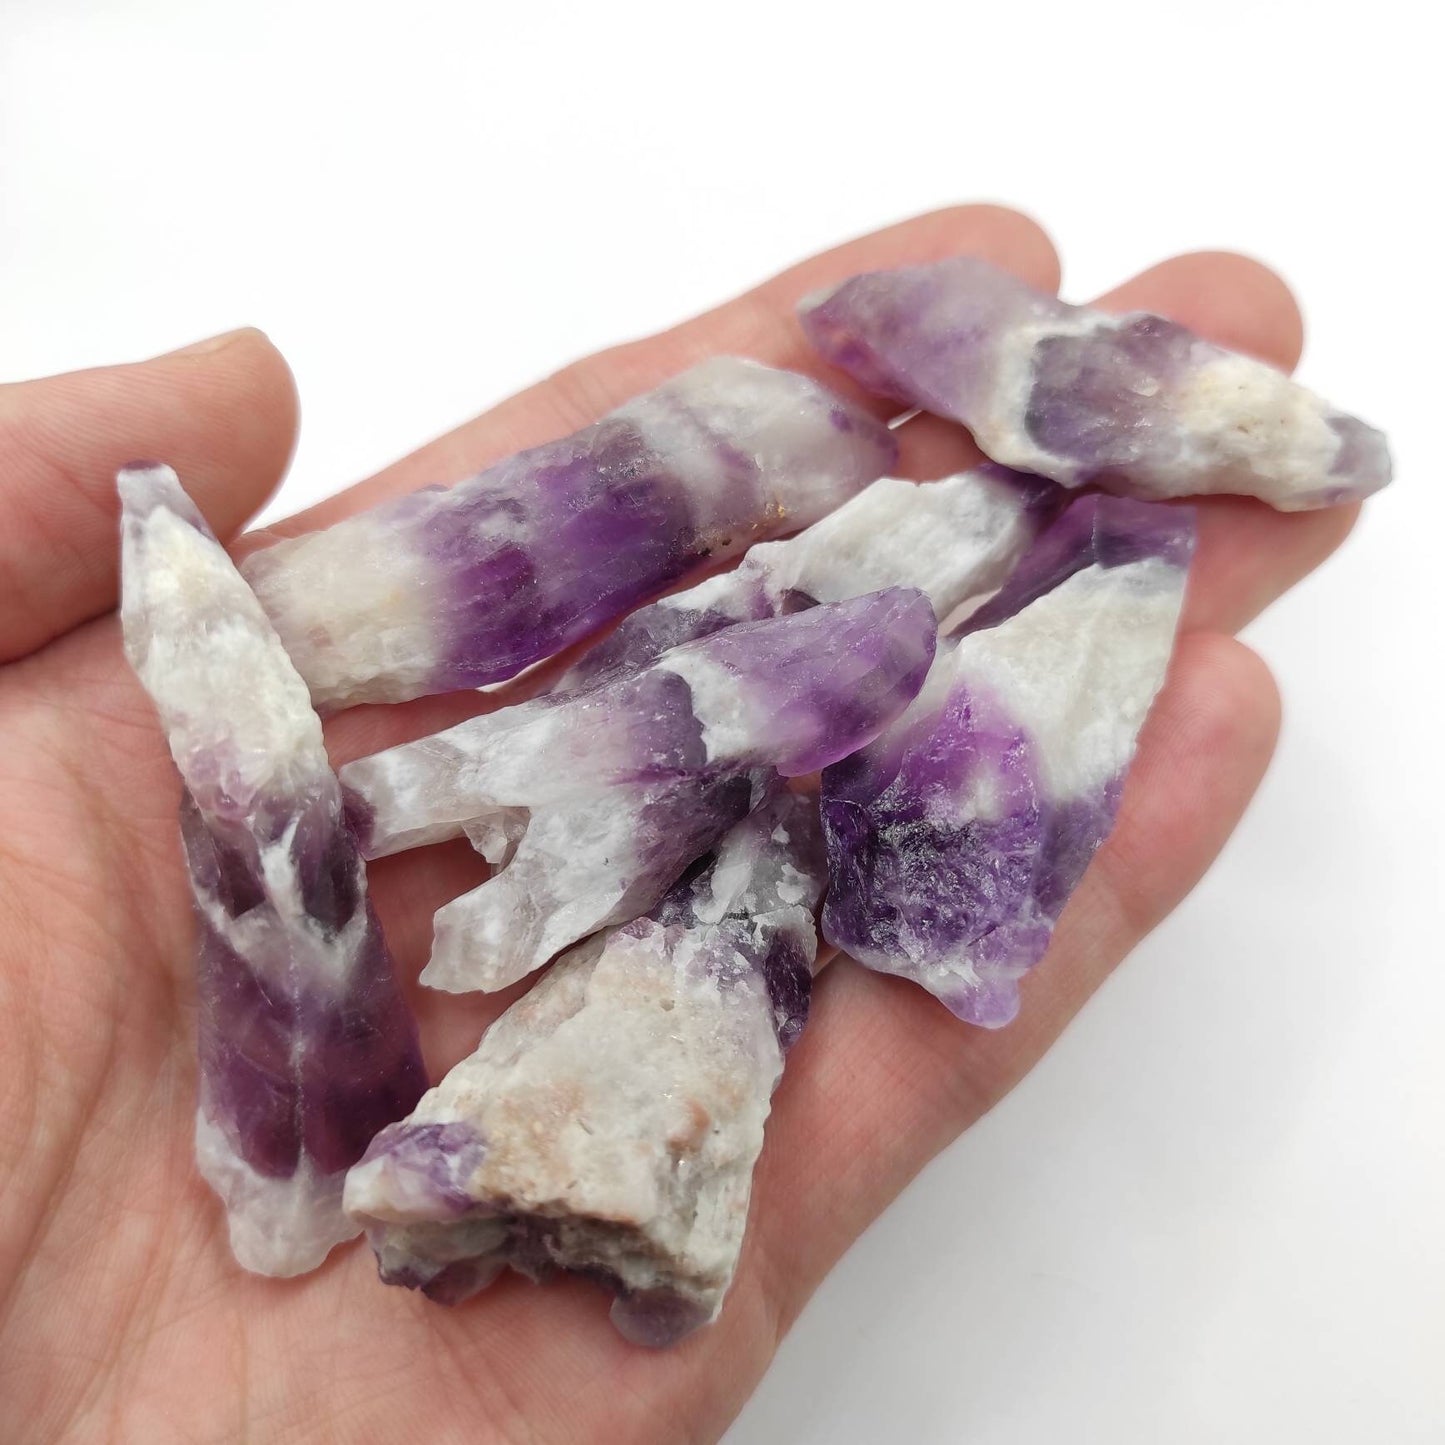 104g One-of-a-Kind Lot of Chevron Amethyst Points - Natural Purple and White Rough Chevron Amethyst - Dream Amethyst Points - Raw Amethyst